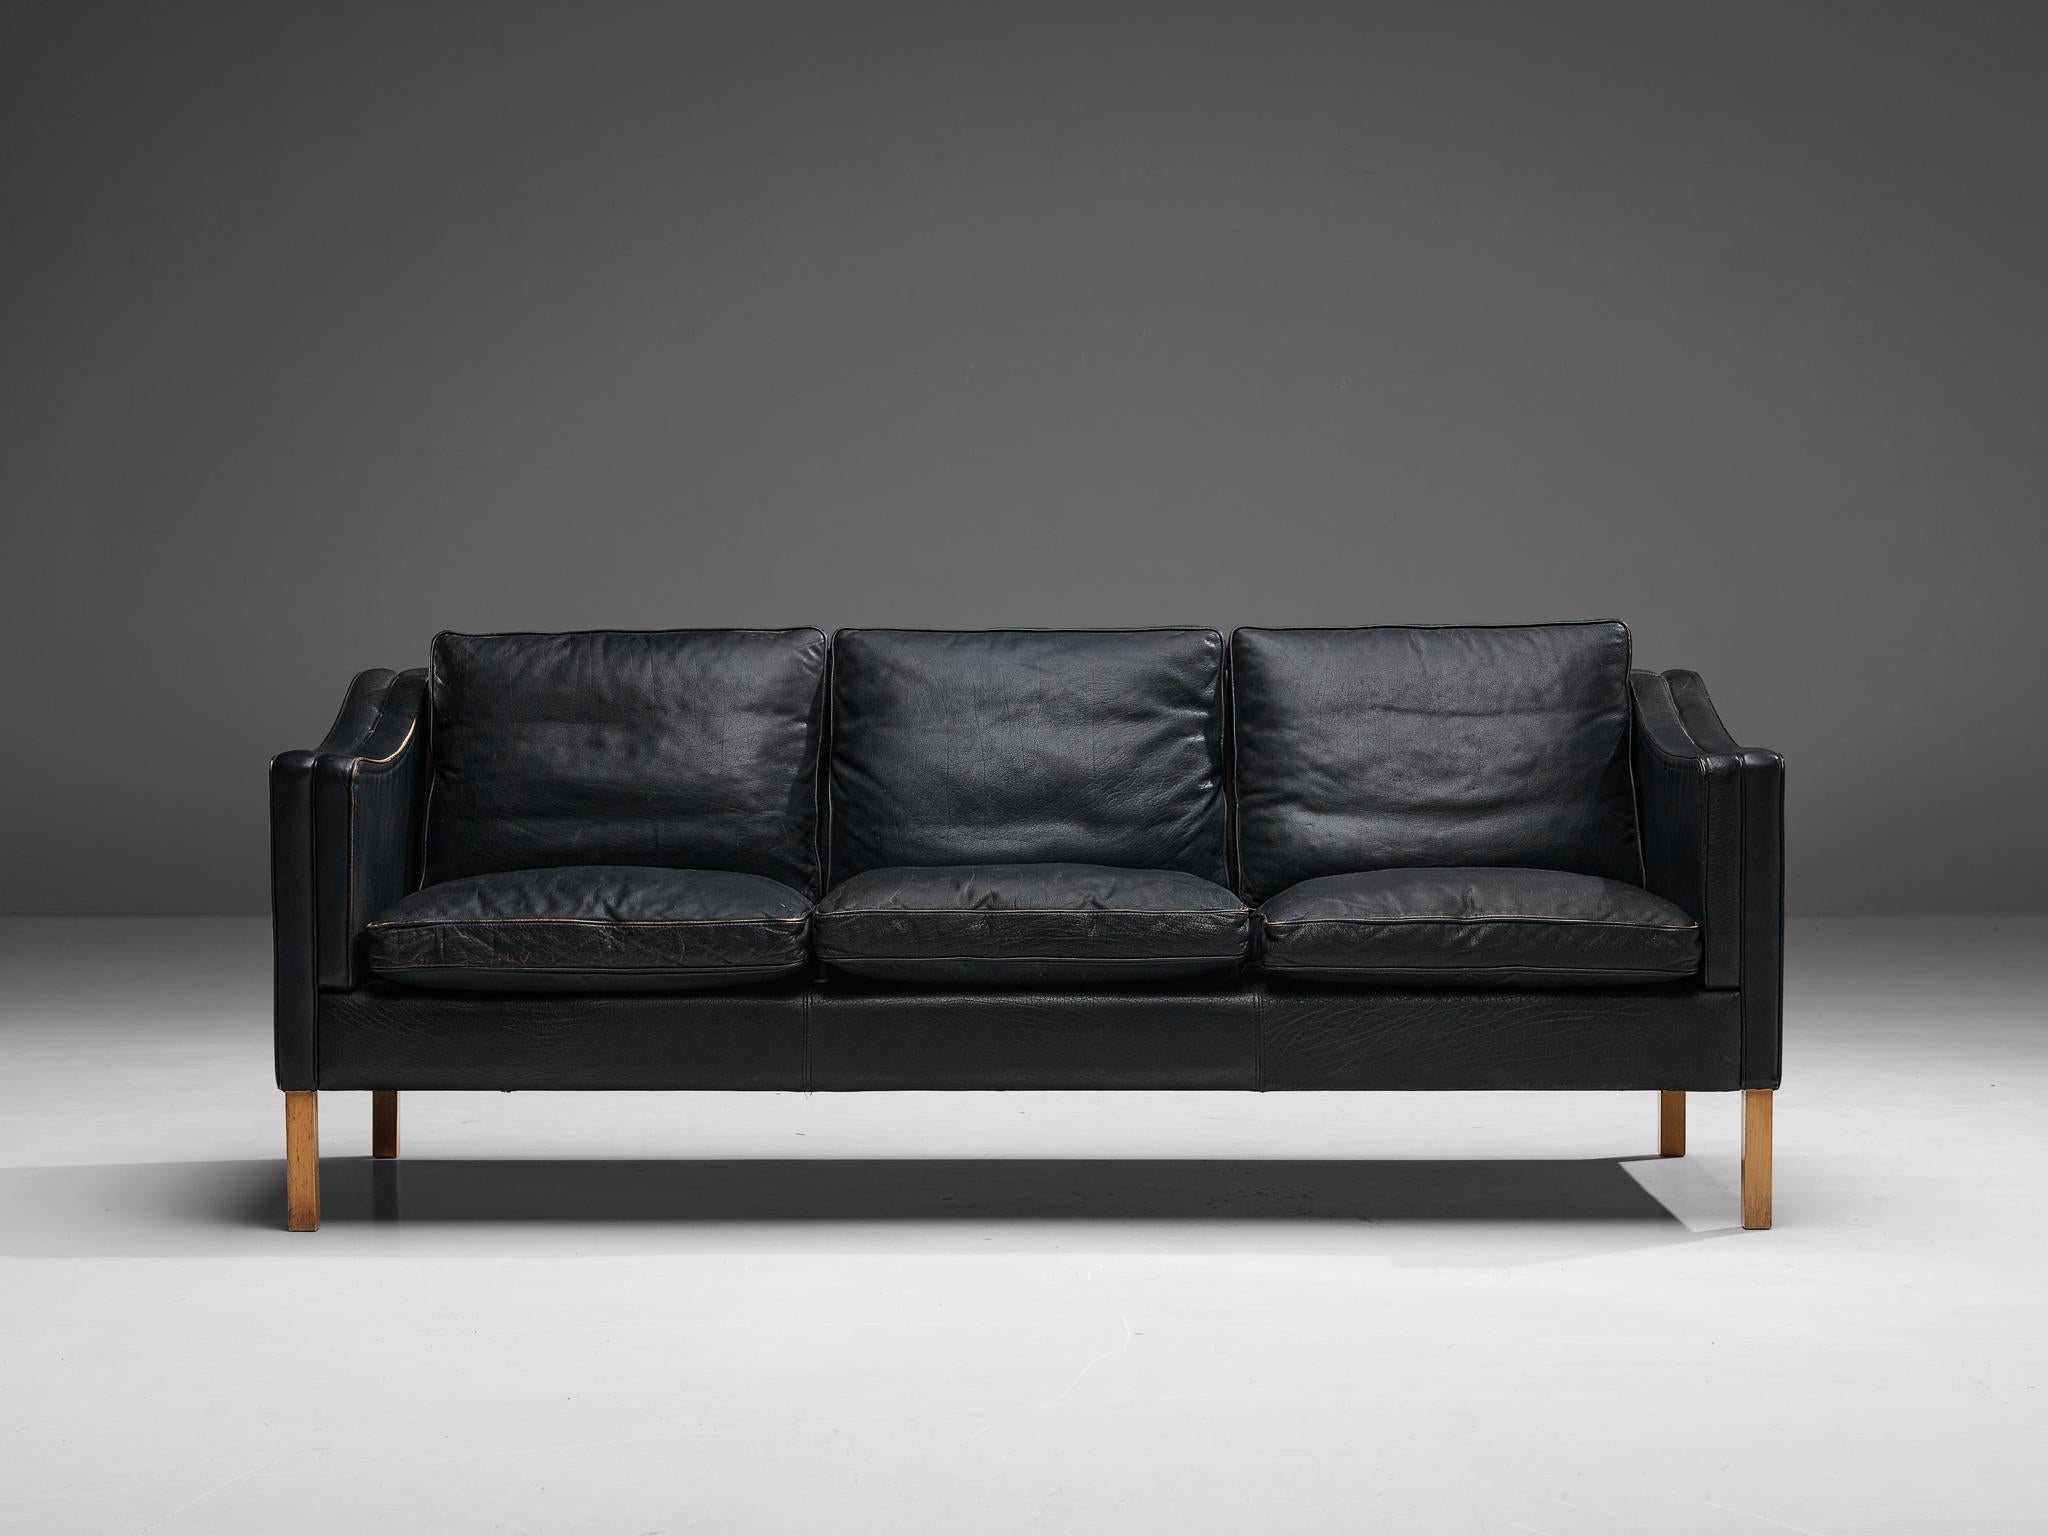 Sofa, leather, stained wood, Denmark, 1960s

This model reminds of Borge Mogensen's designs. A well-proportioned sofa executed within a simple construction. The dawn-filled cuhions are executed in a fine black leather that shows a light patina.